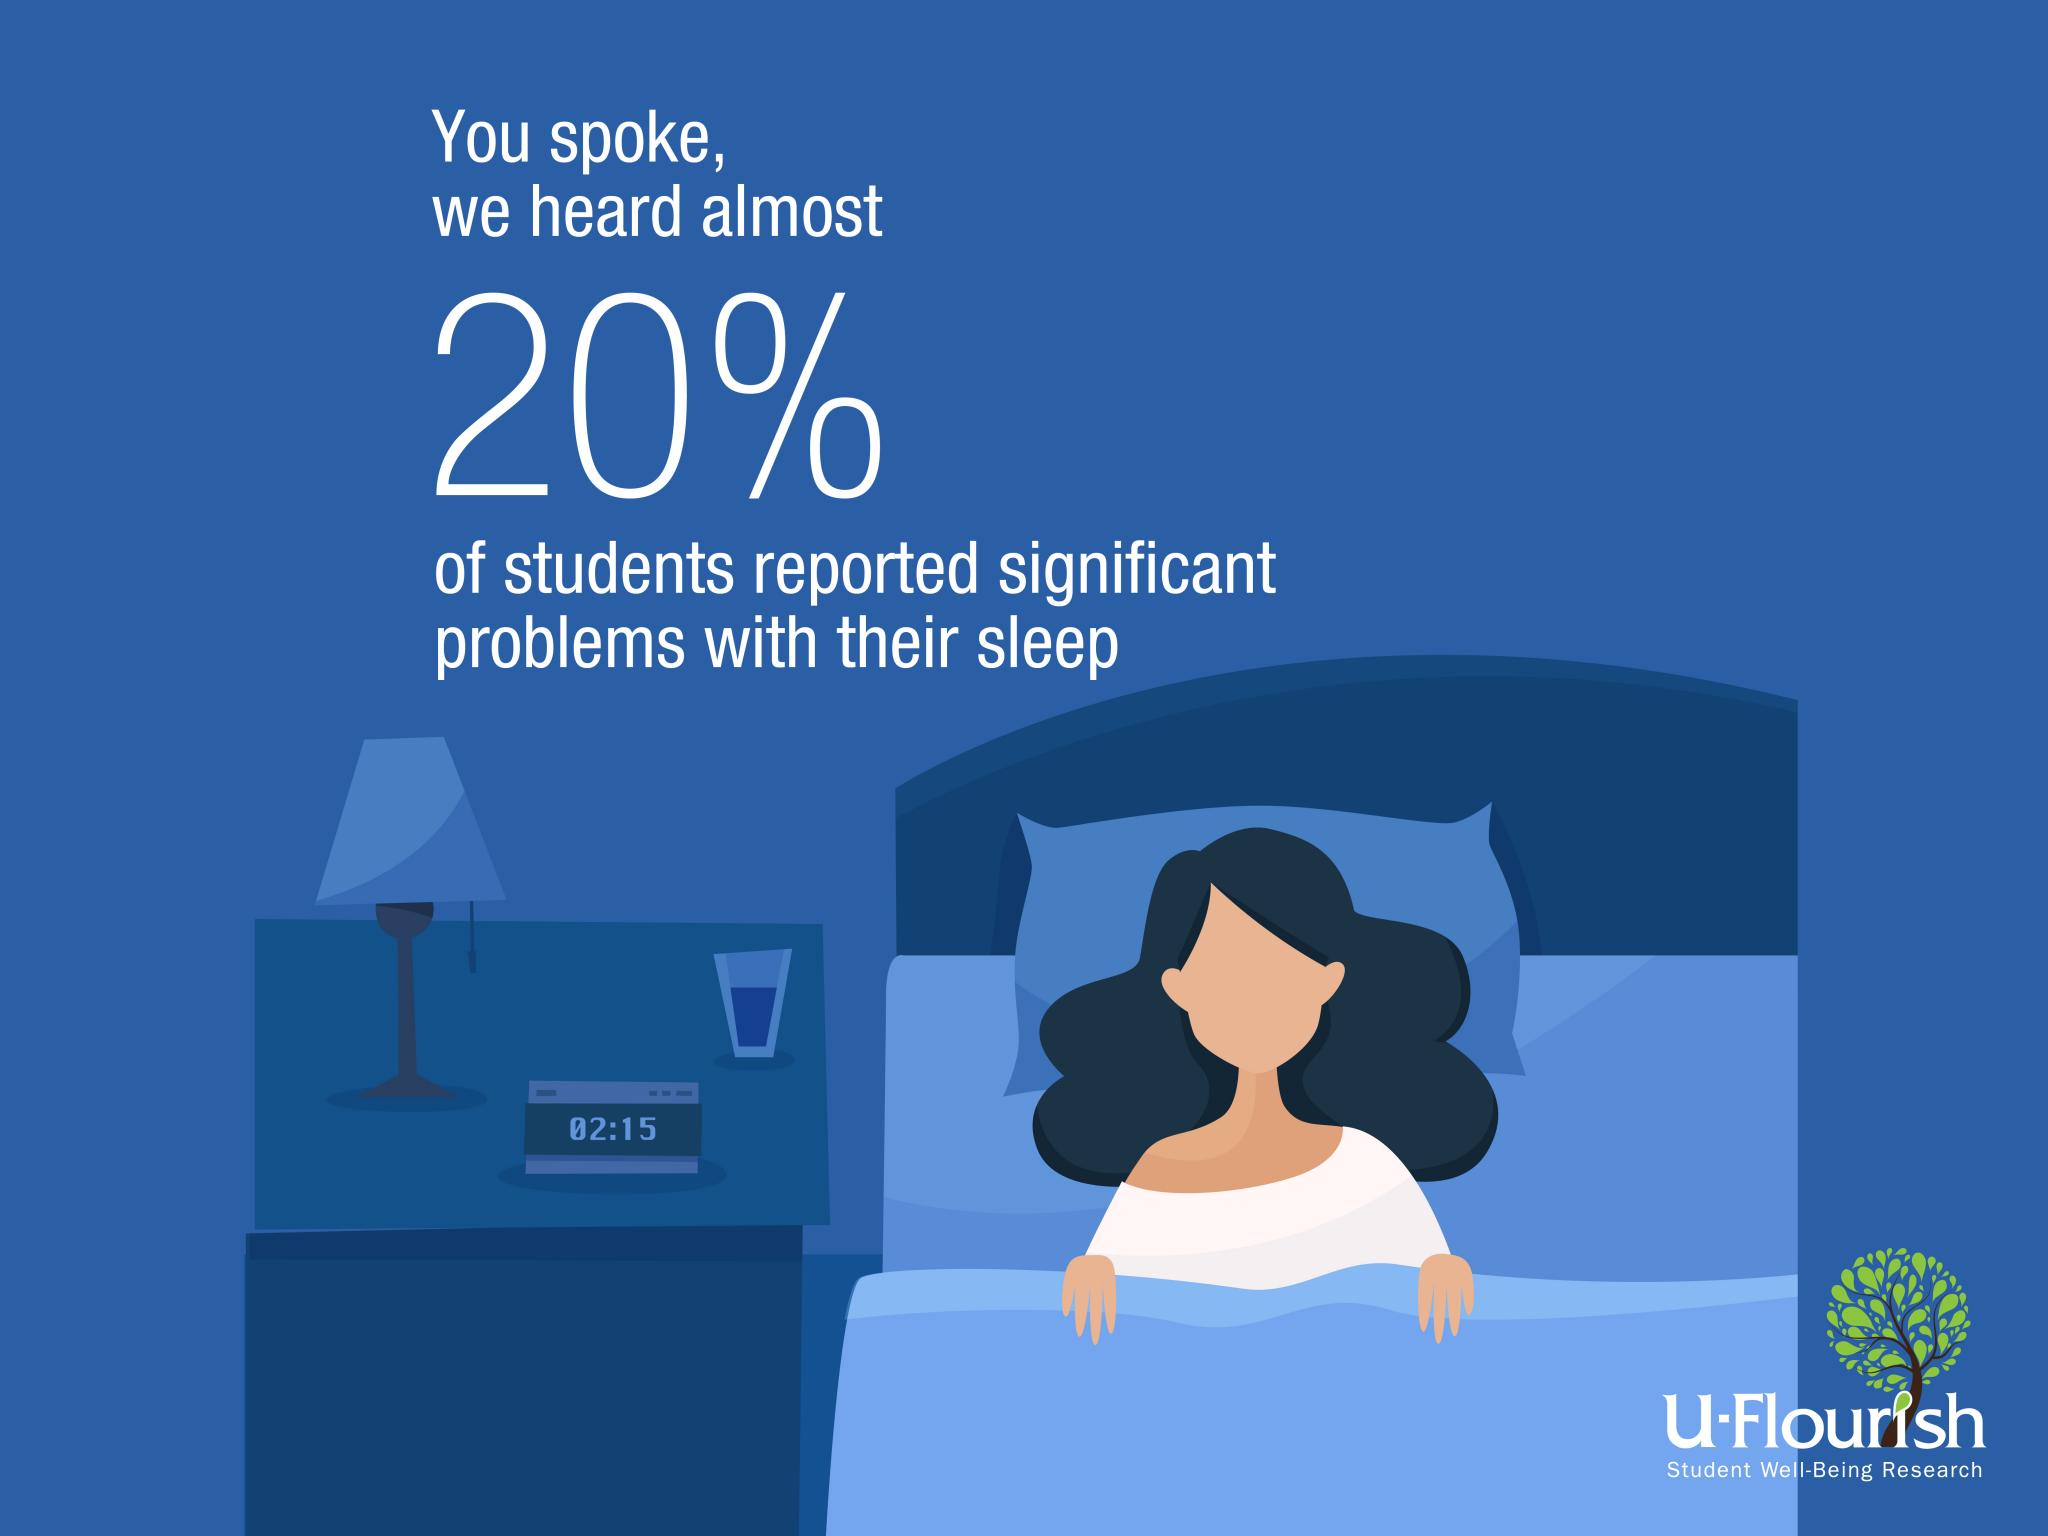 You spoke we heard almost 20% of students reported significant problems with their sleep